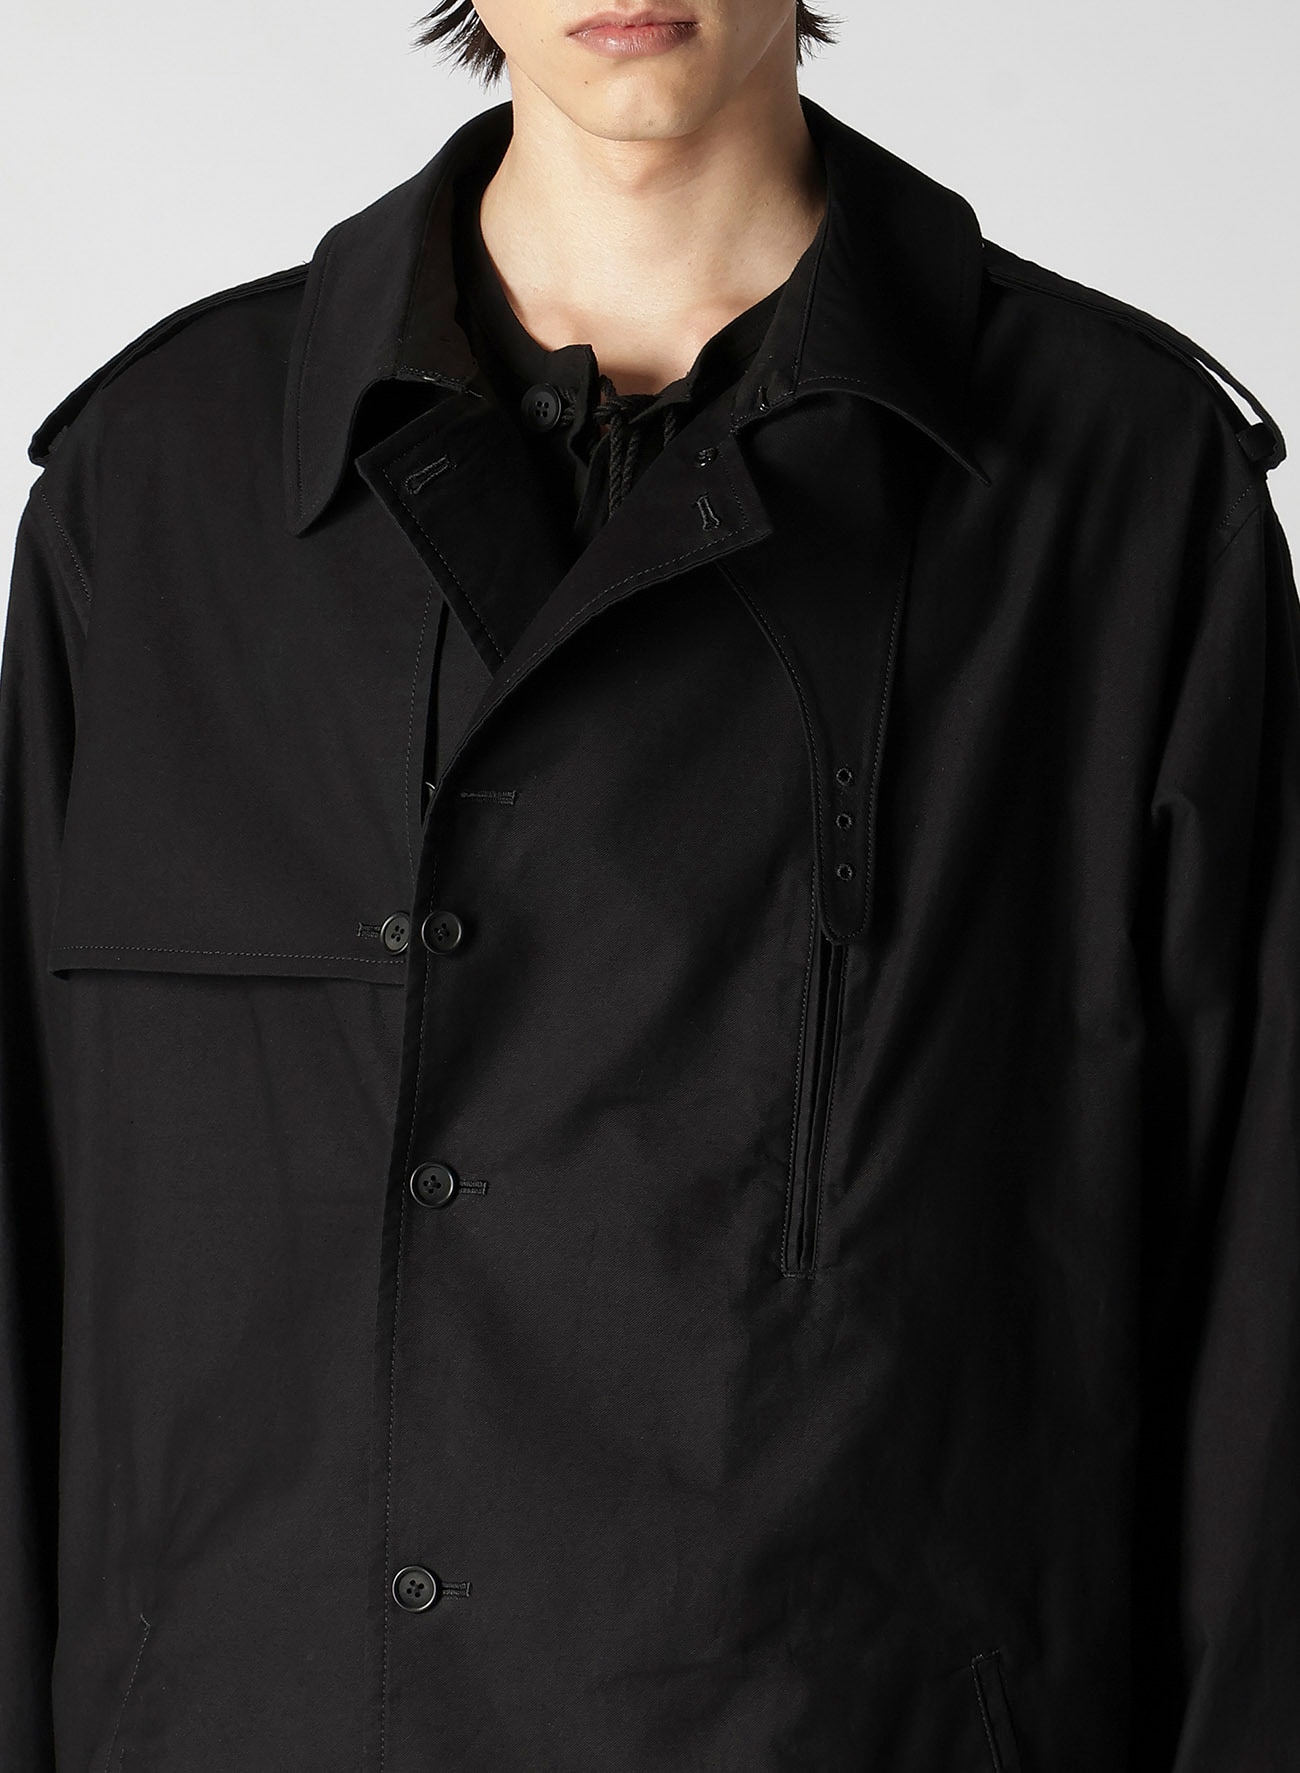 WIDE TWILL Z-TRENCH-STYLE BLOUSON